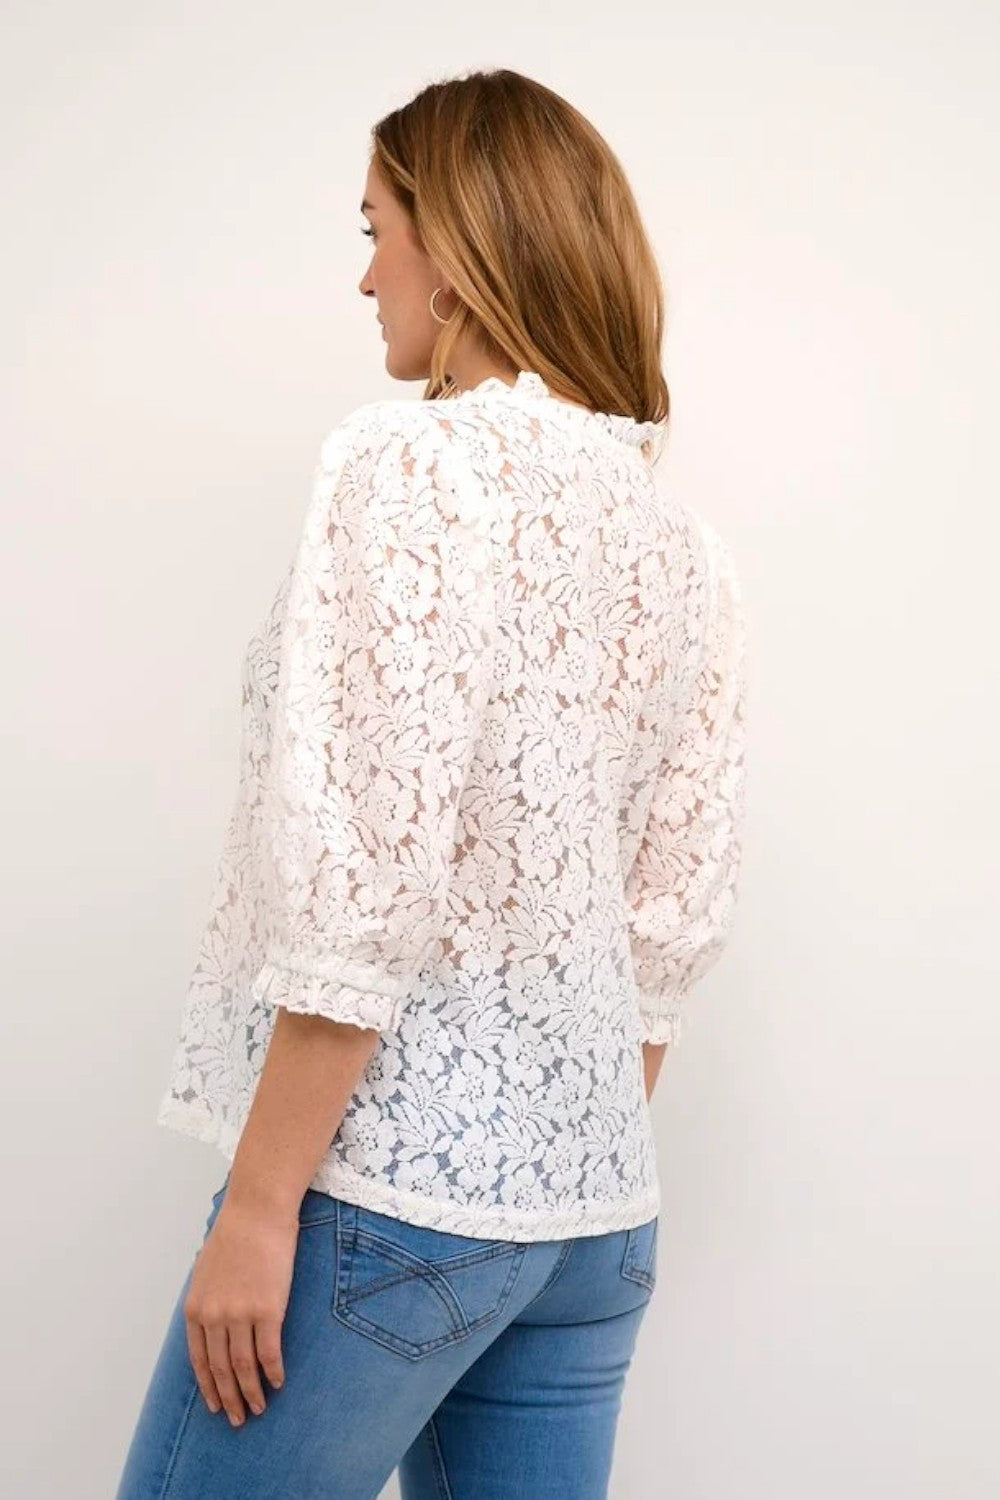 This stylish knitted blouse features an A-shape fit and hip-length cut, perfect for a chic, casual look. The short sleeves extend below the elbow, adding a unique touch to its design. Pair with fitted jeans or a flowing skirt for a complete outfit.